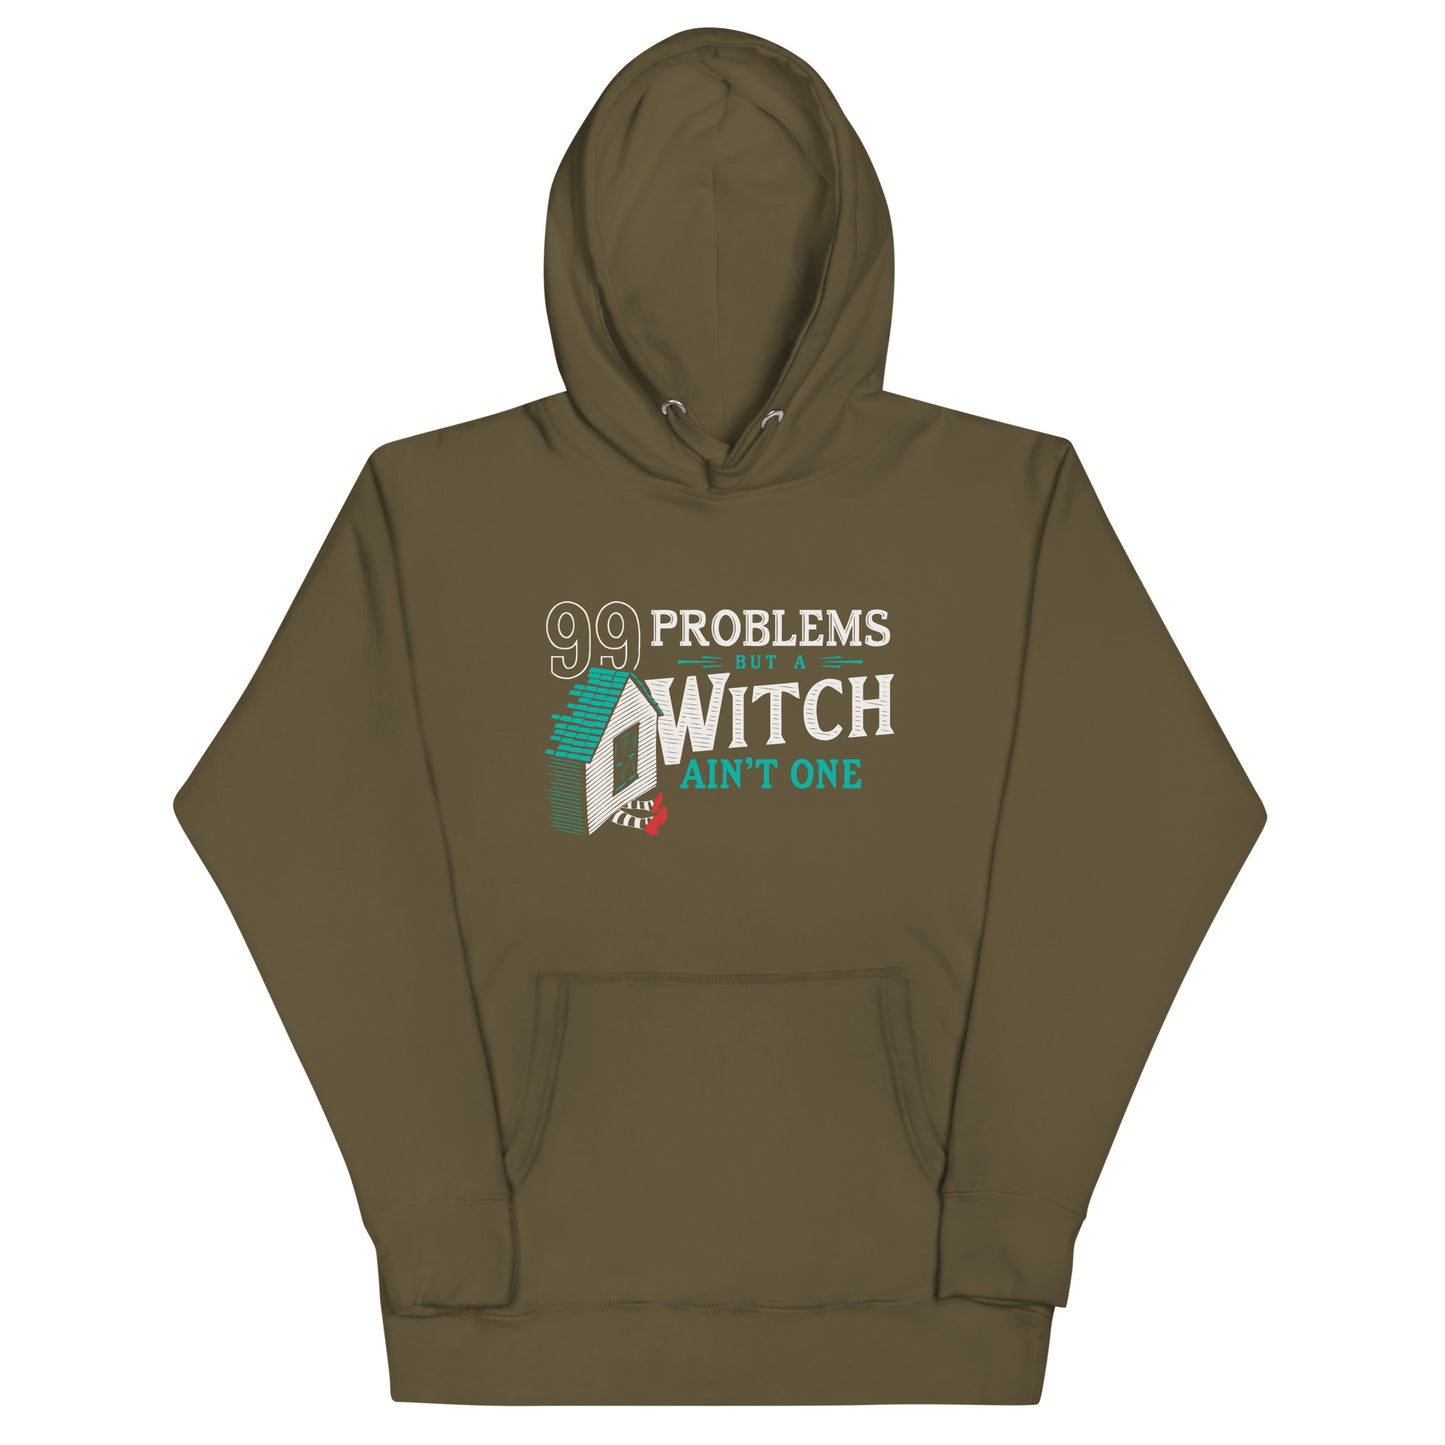 99 Problems But A Witch Ain't One Unisex Hoodie